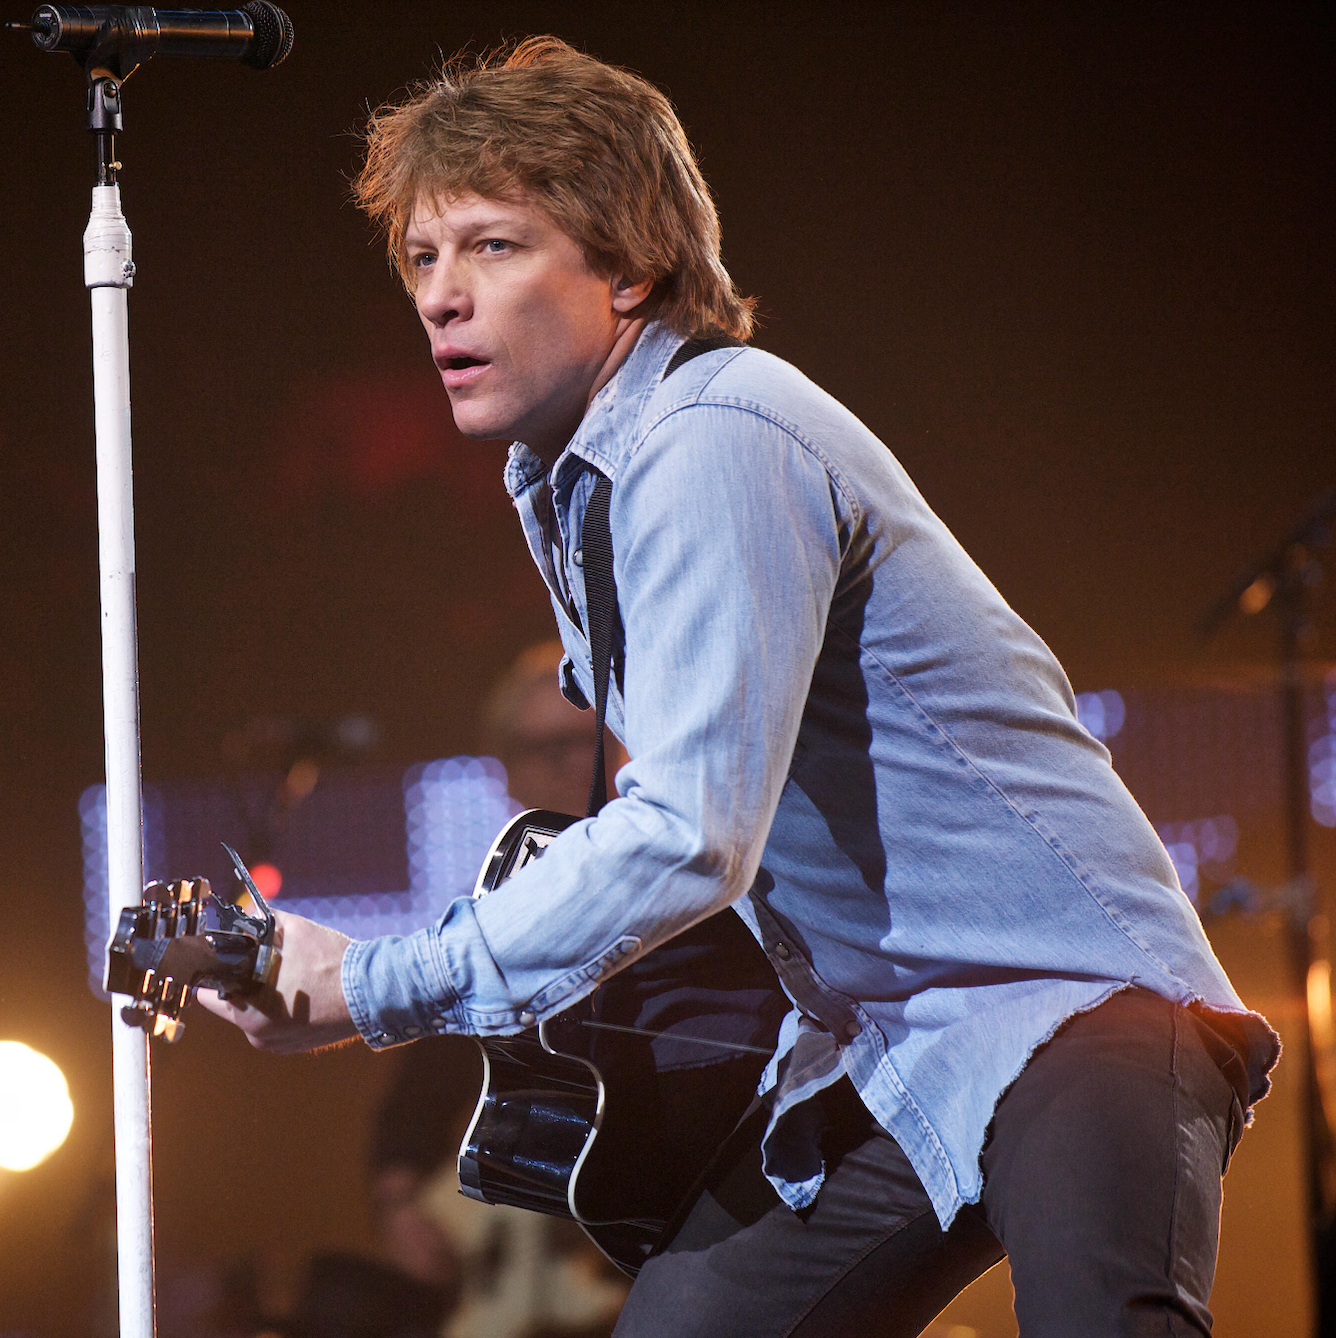 How to Watch Thank You, Goodnight: The Bon Jovi Story